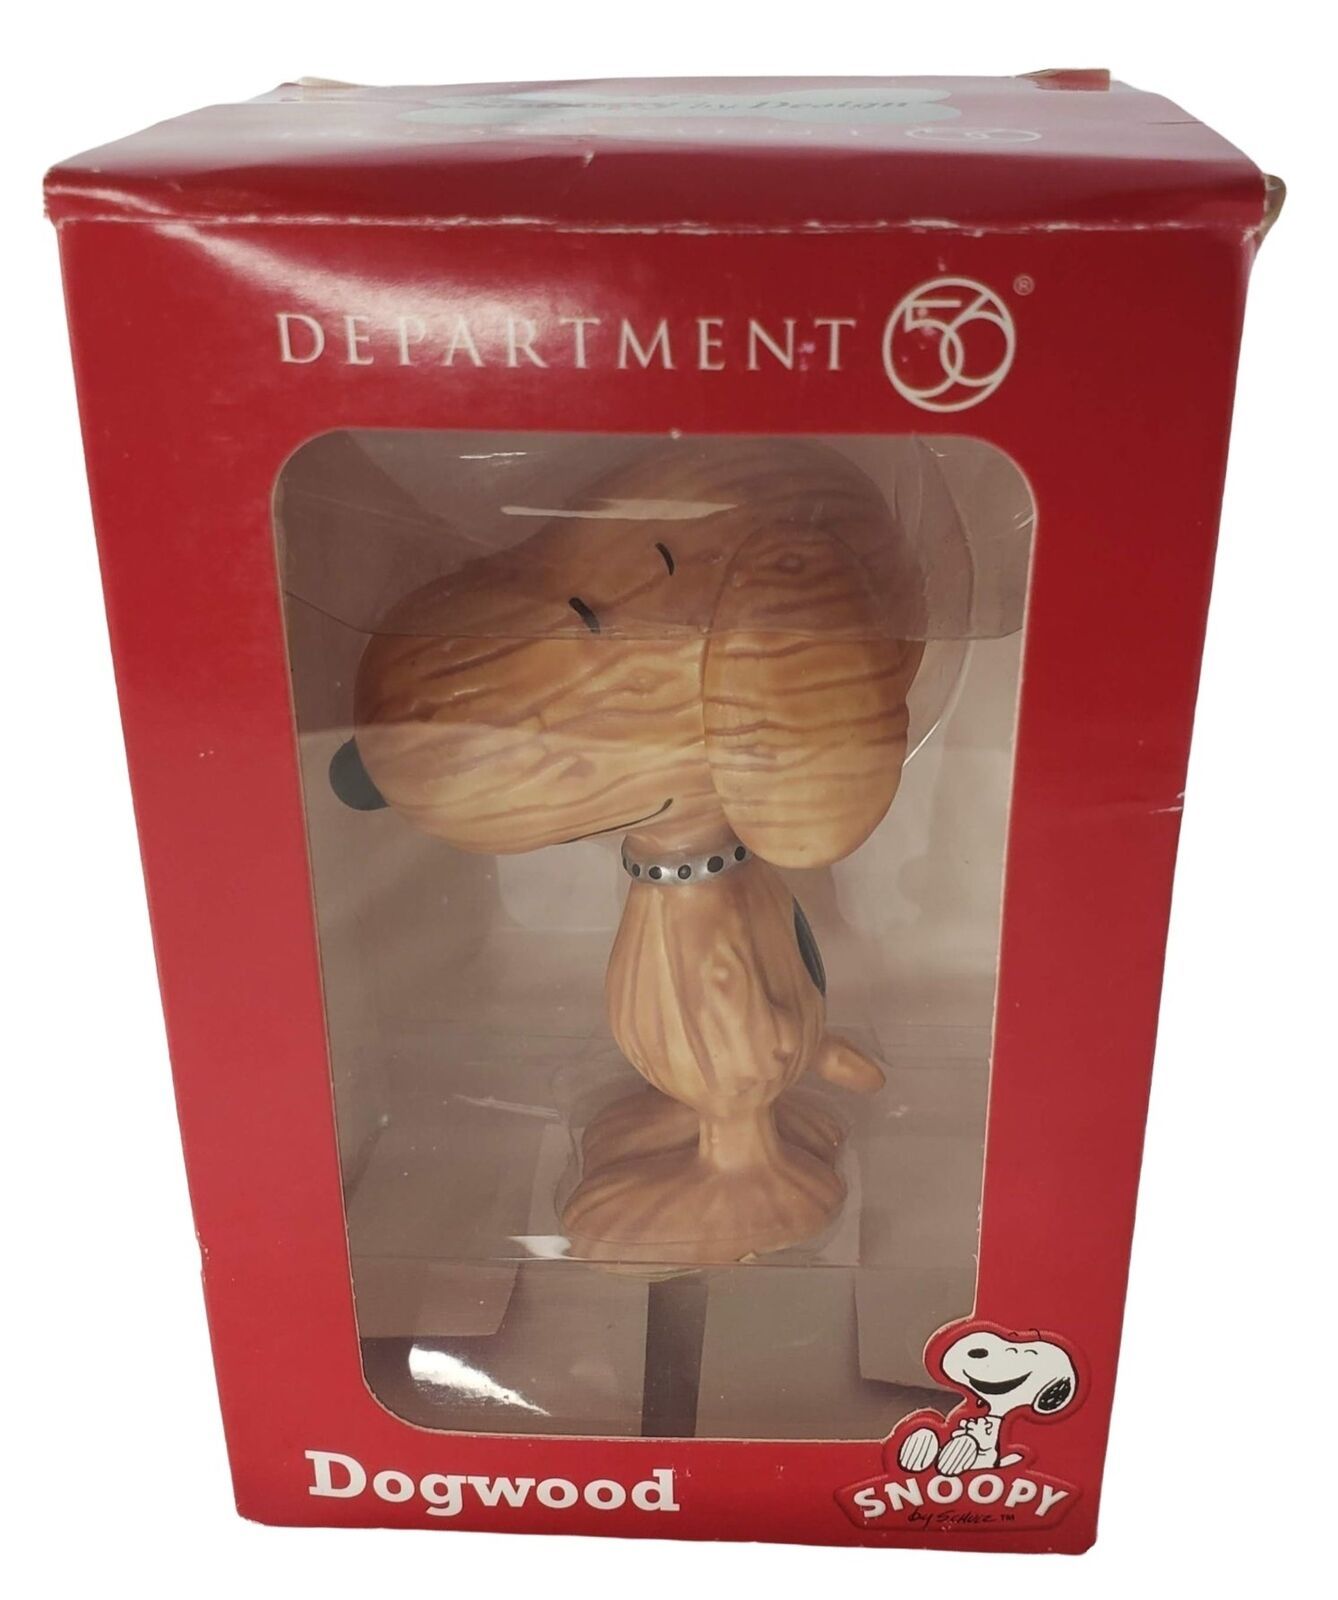 Primary image for Department 56 Peanuts Snoopy By Design Dogwood Porcelain Figurine 2013 Series